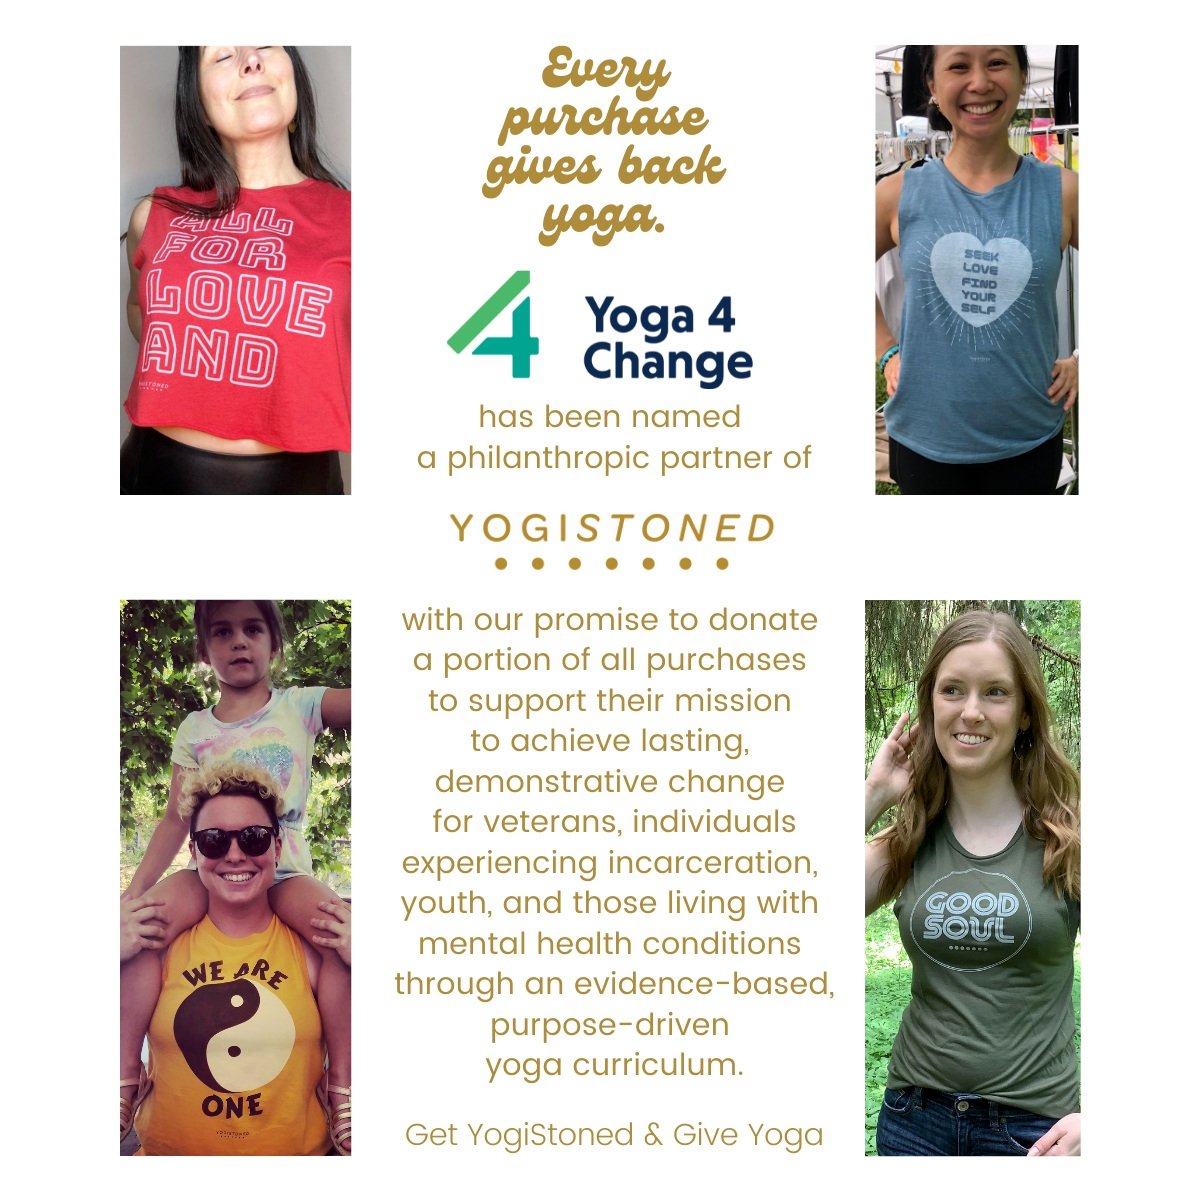 Buy+YogiStoned.+Give+Yoga.+%28Business+Card%29+%2822+x+4.5+in%29+2.jpg